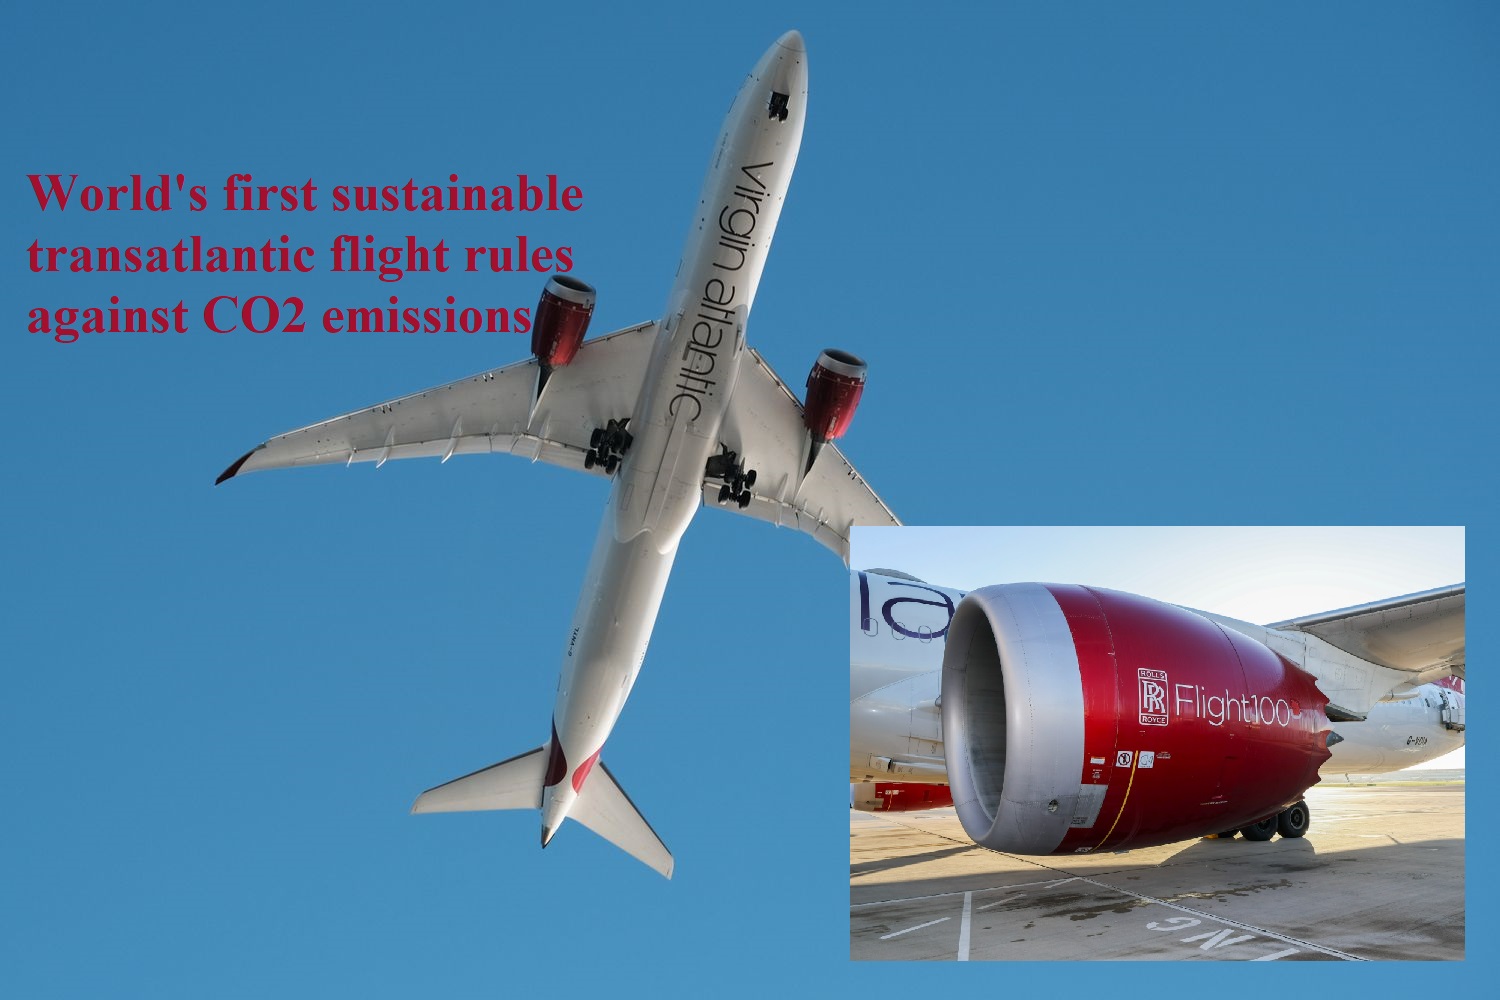 World’s first sustainable transatlantic flight rules against CO2 emissions